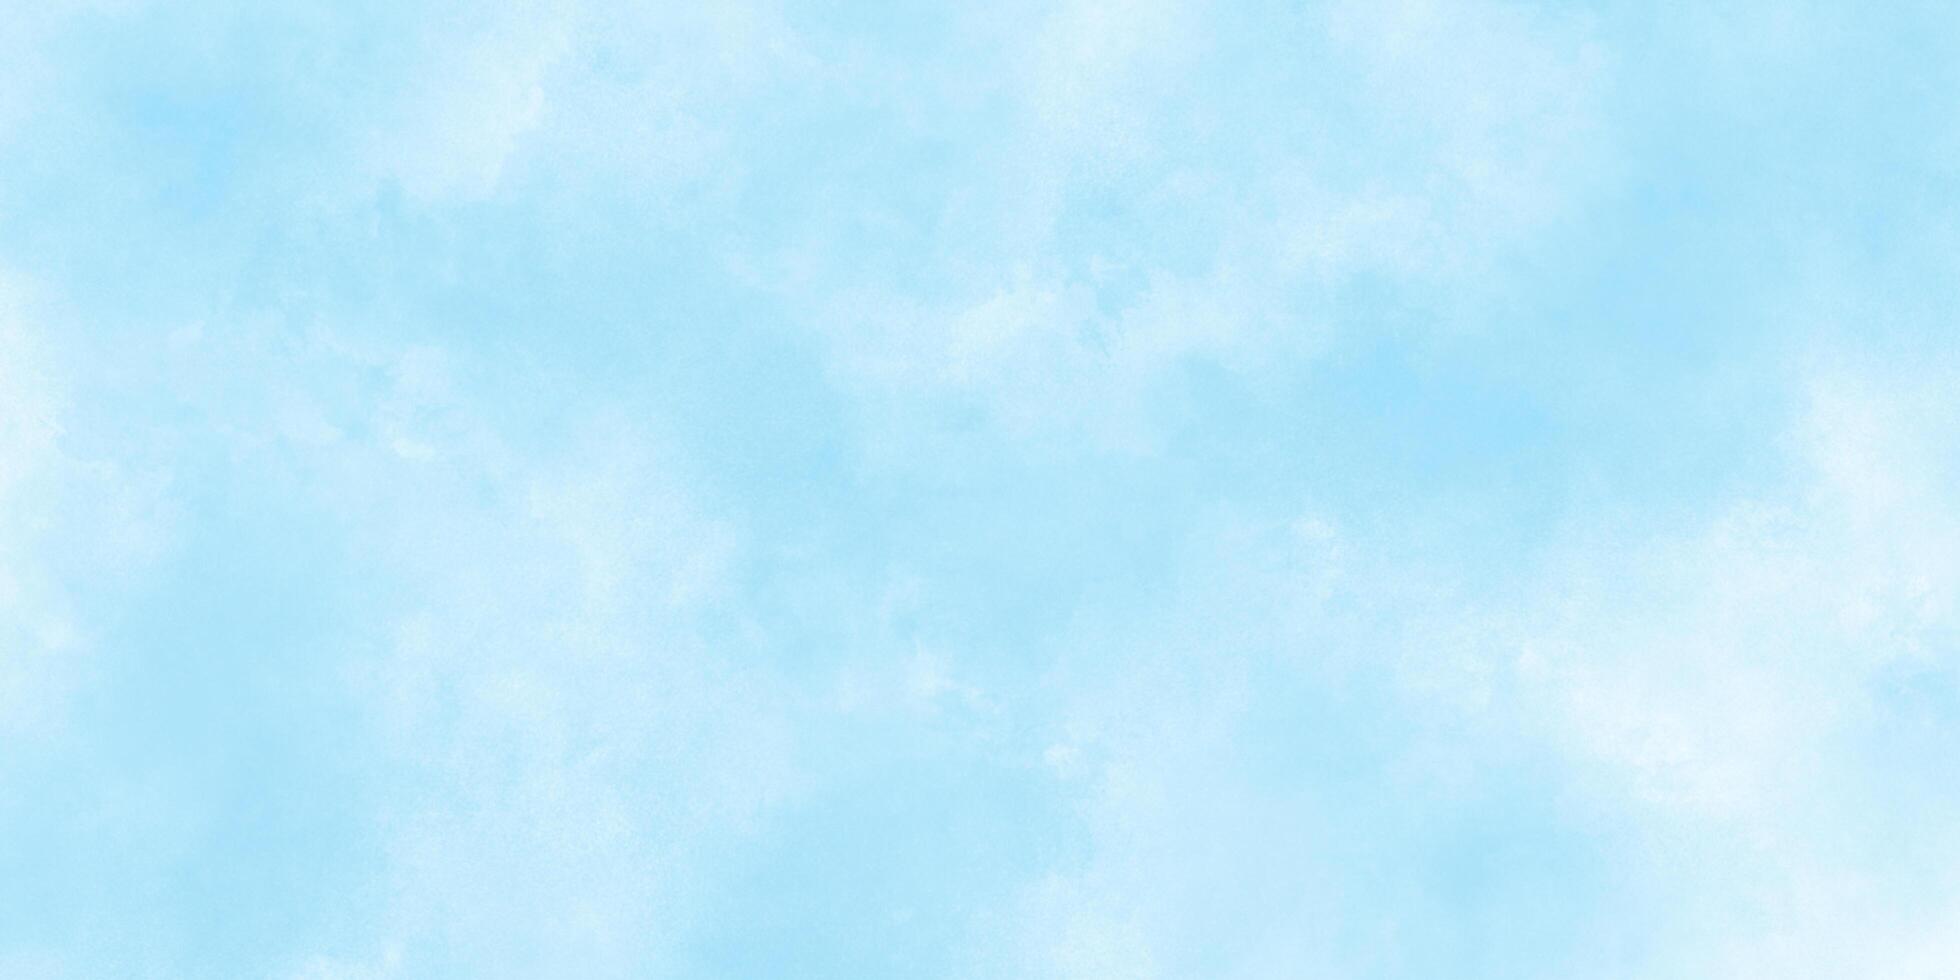 Abstract sky blue watercolor background with paint, Brush-painted blue watercolor background with watercolor splashes and stains for decoration and design. photo